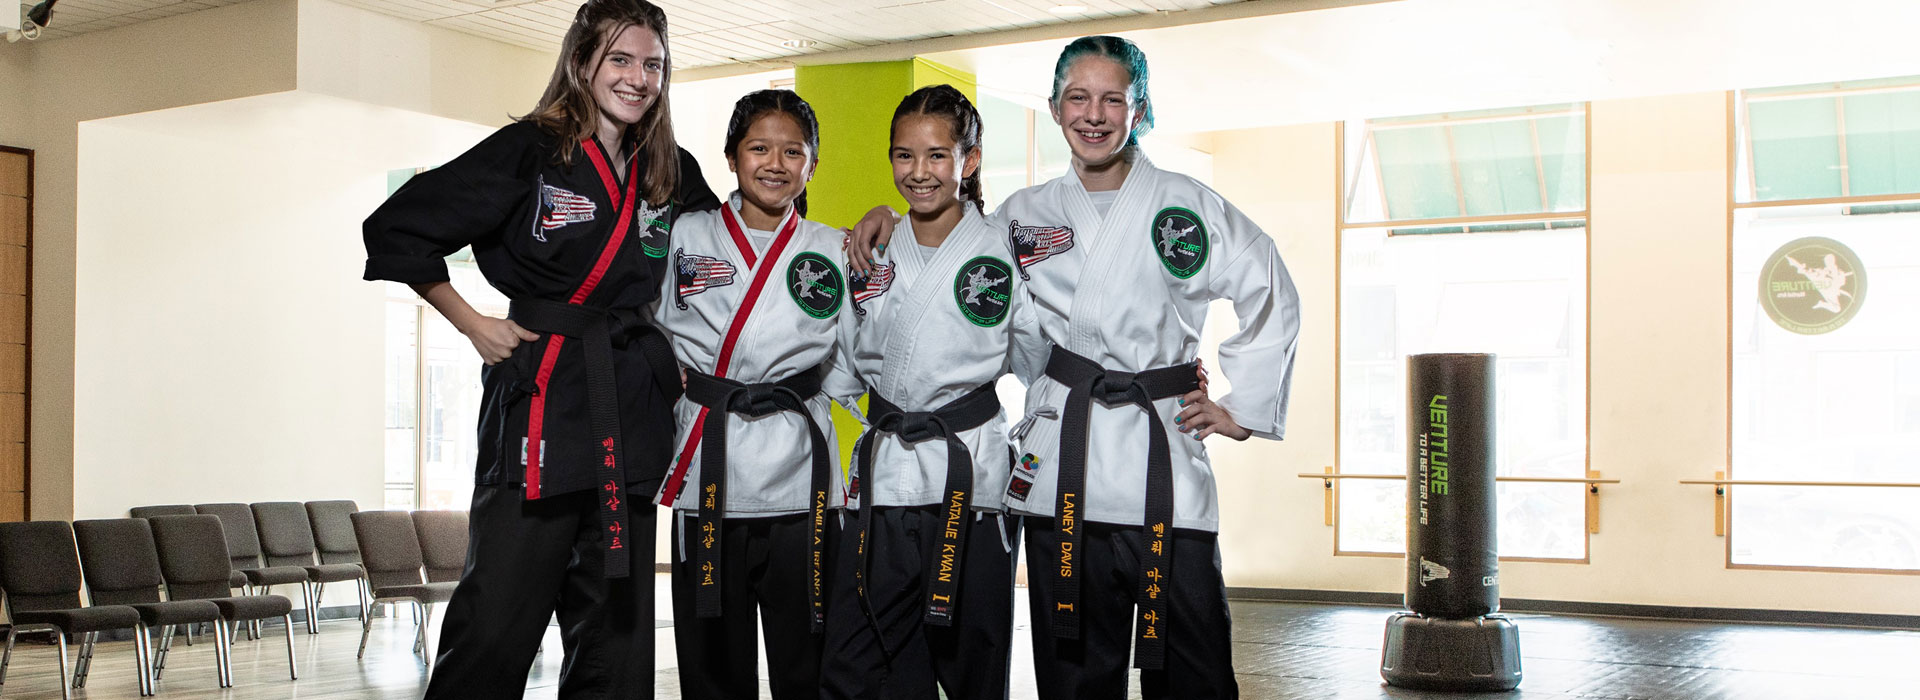 Karate Classes For Kids Ages 7-11 Near North Arvada, Colorado